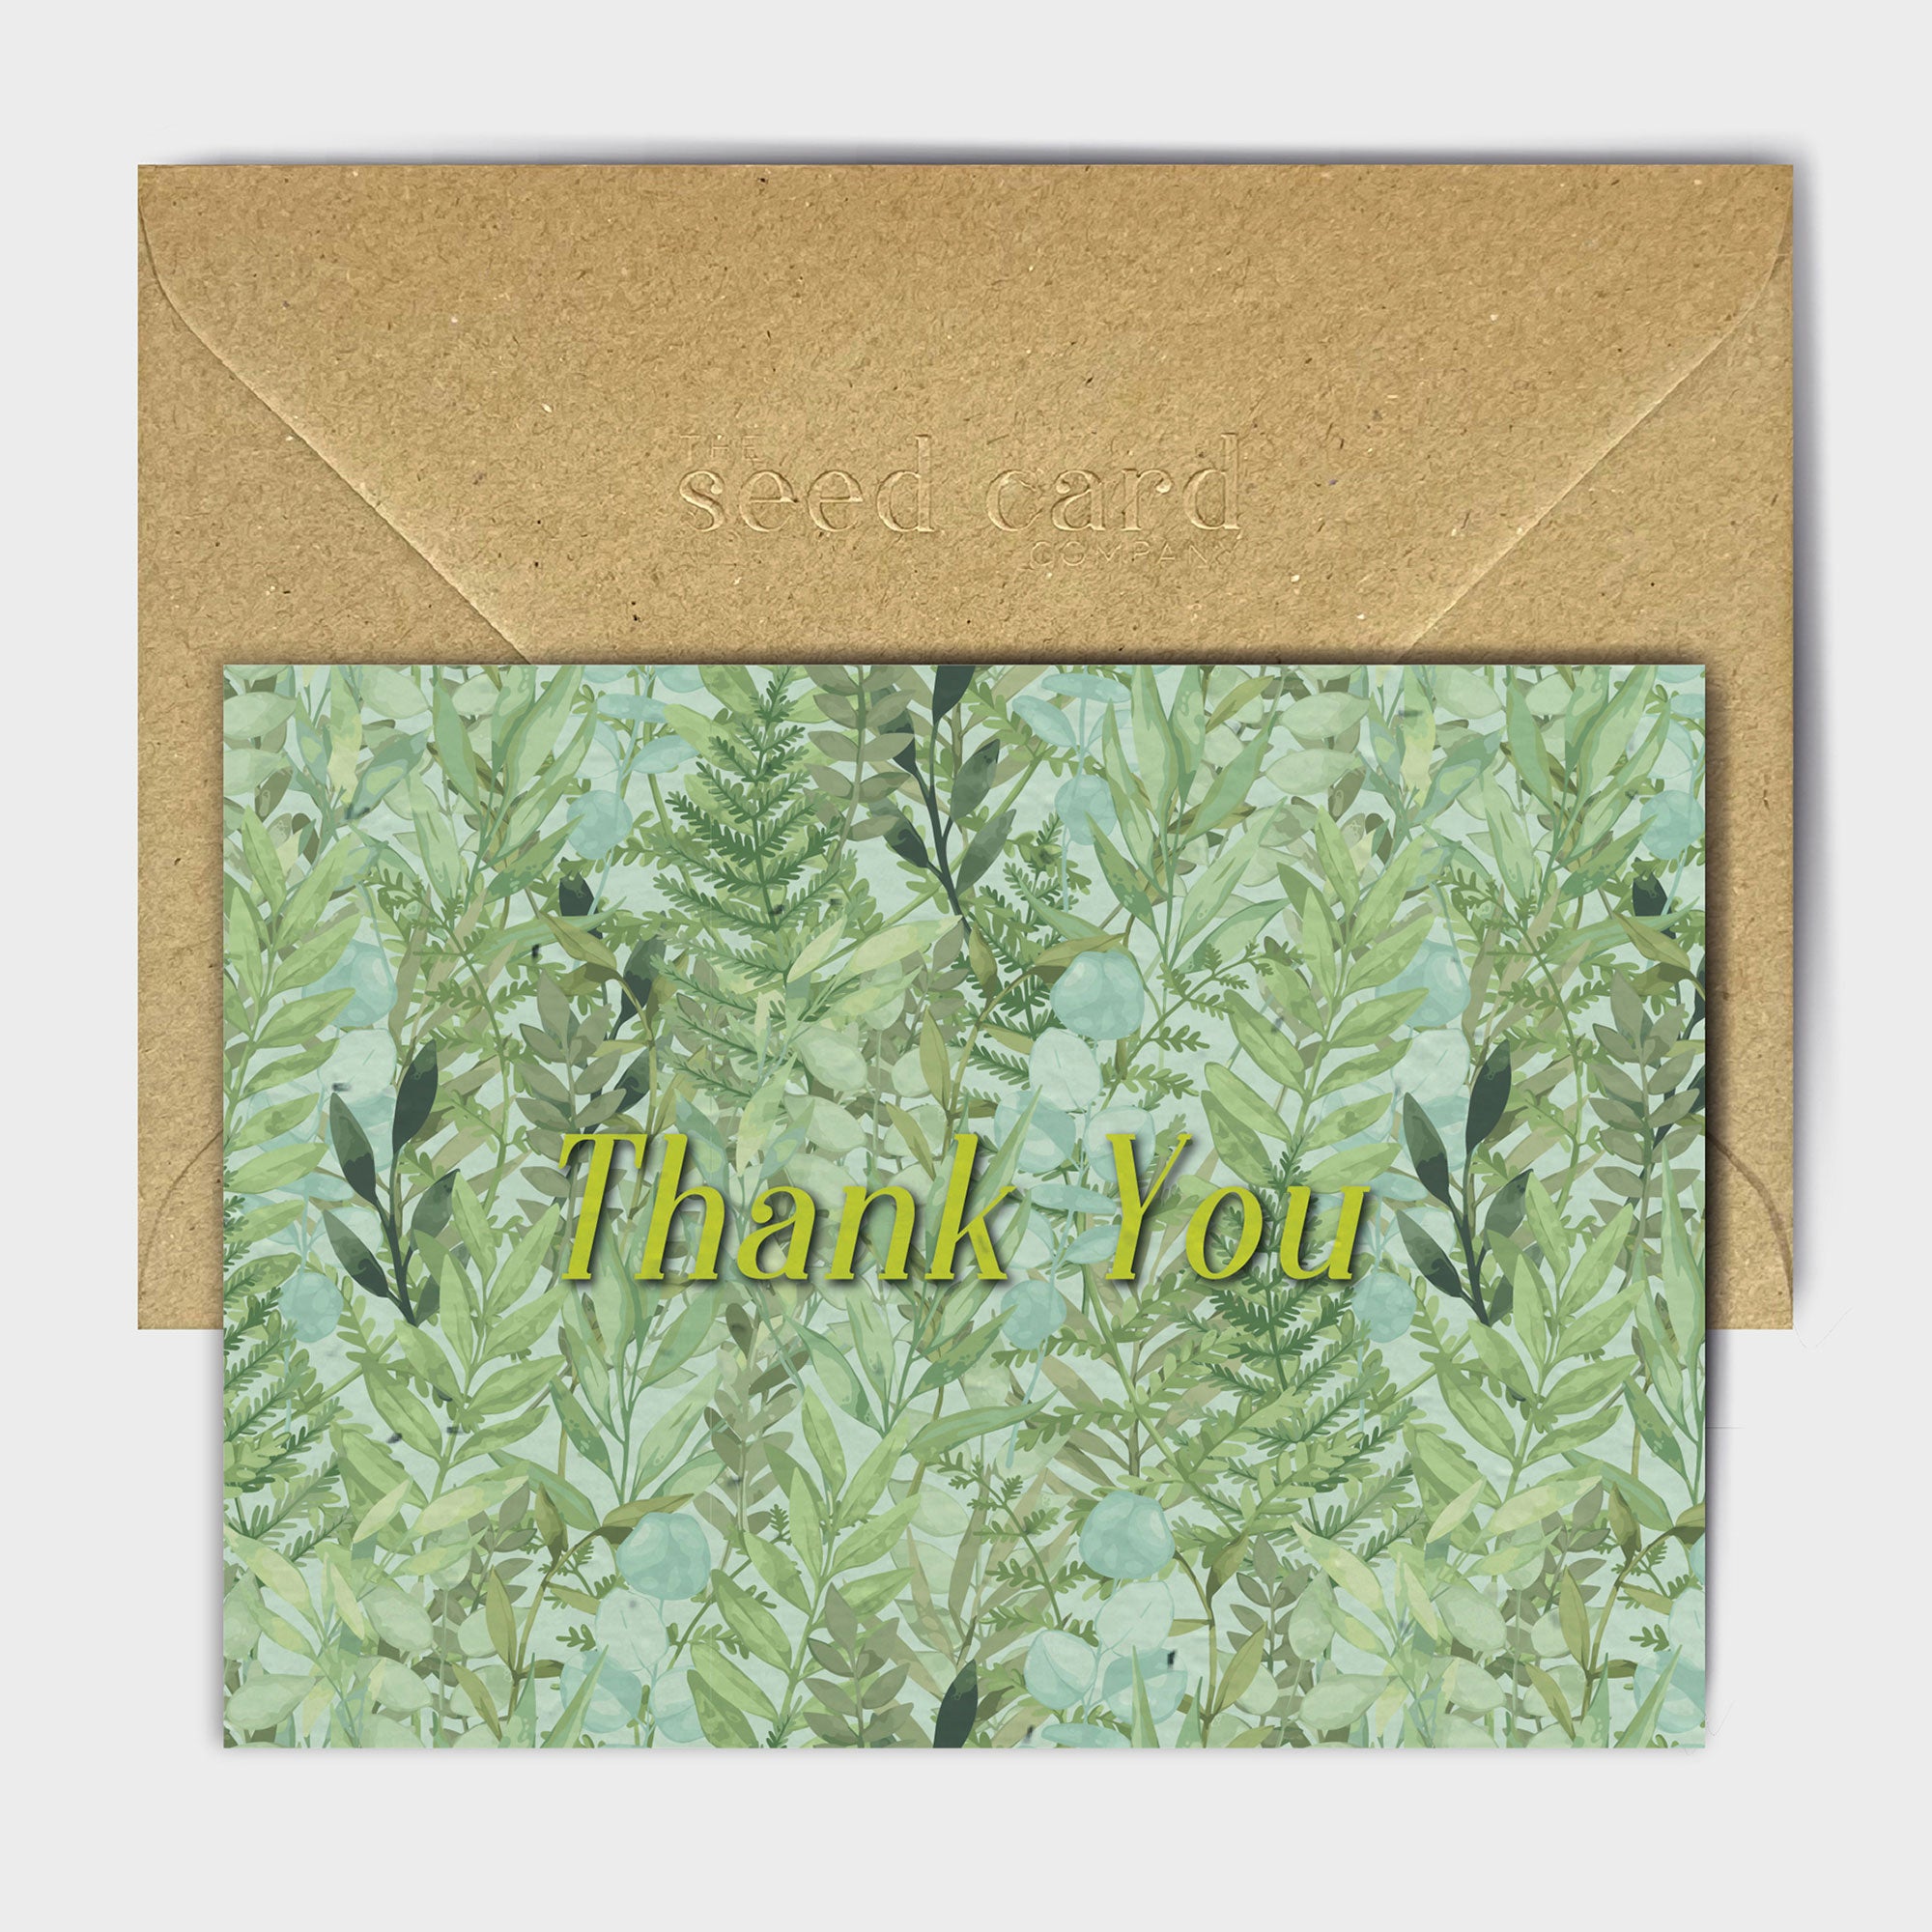 Shop online Ferns & Thanks - 100% biodegradable seed-embedded cards Shop -The Seed Card Company